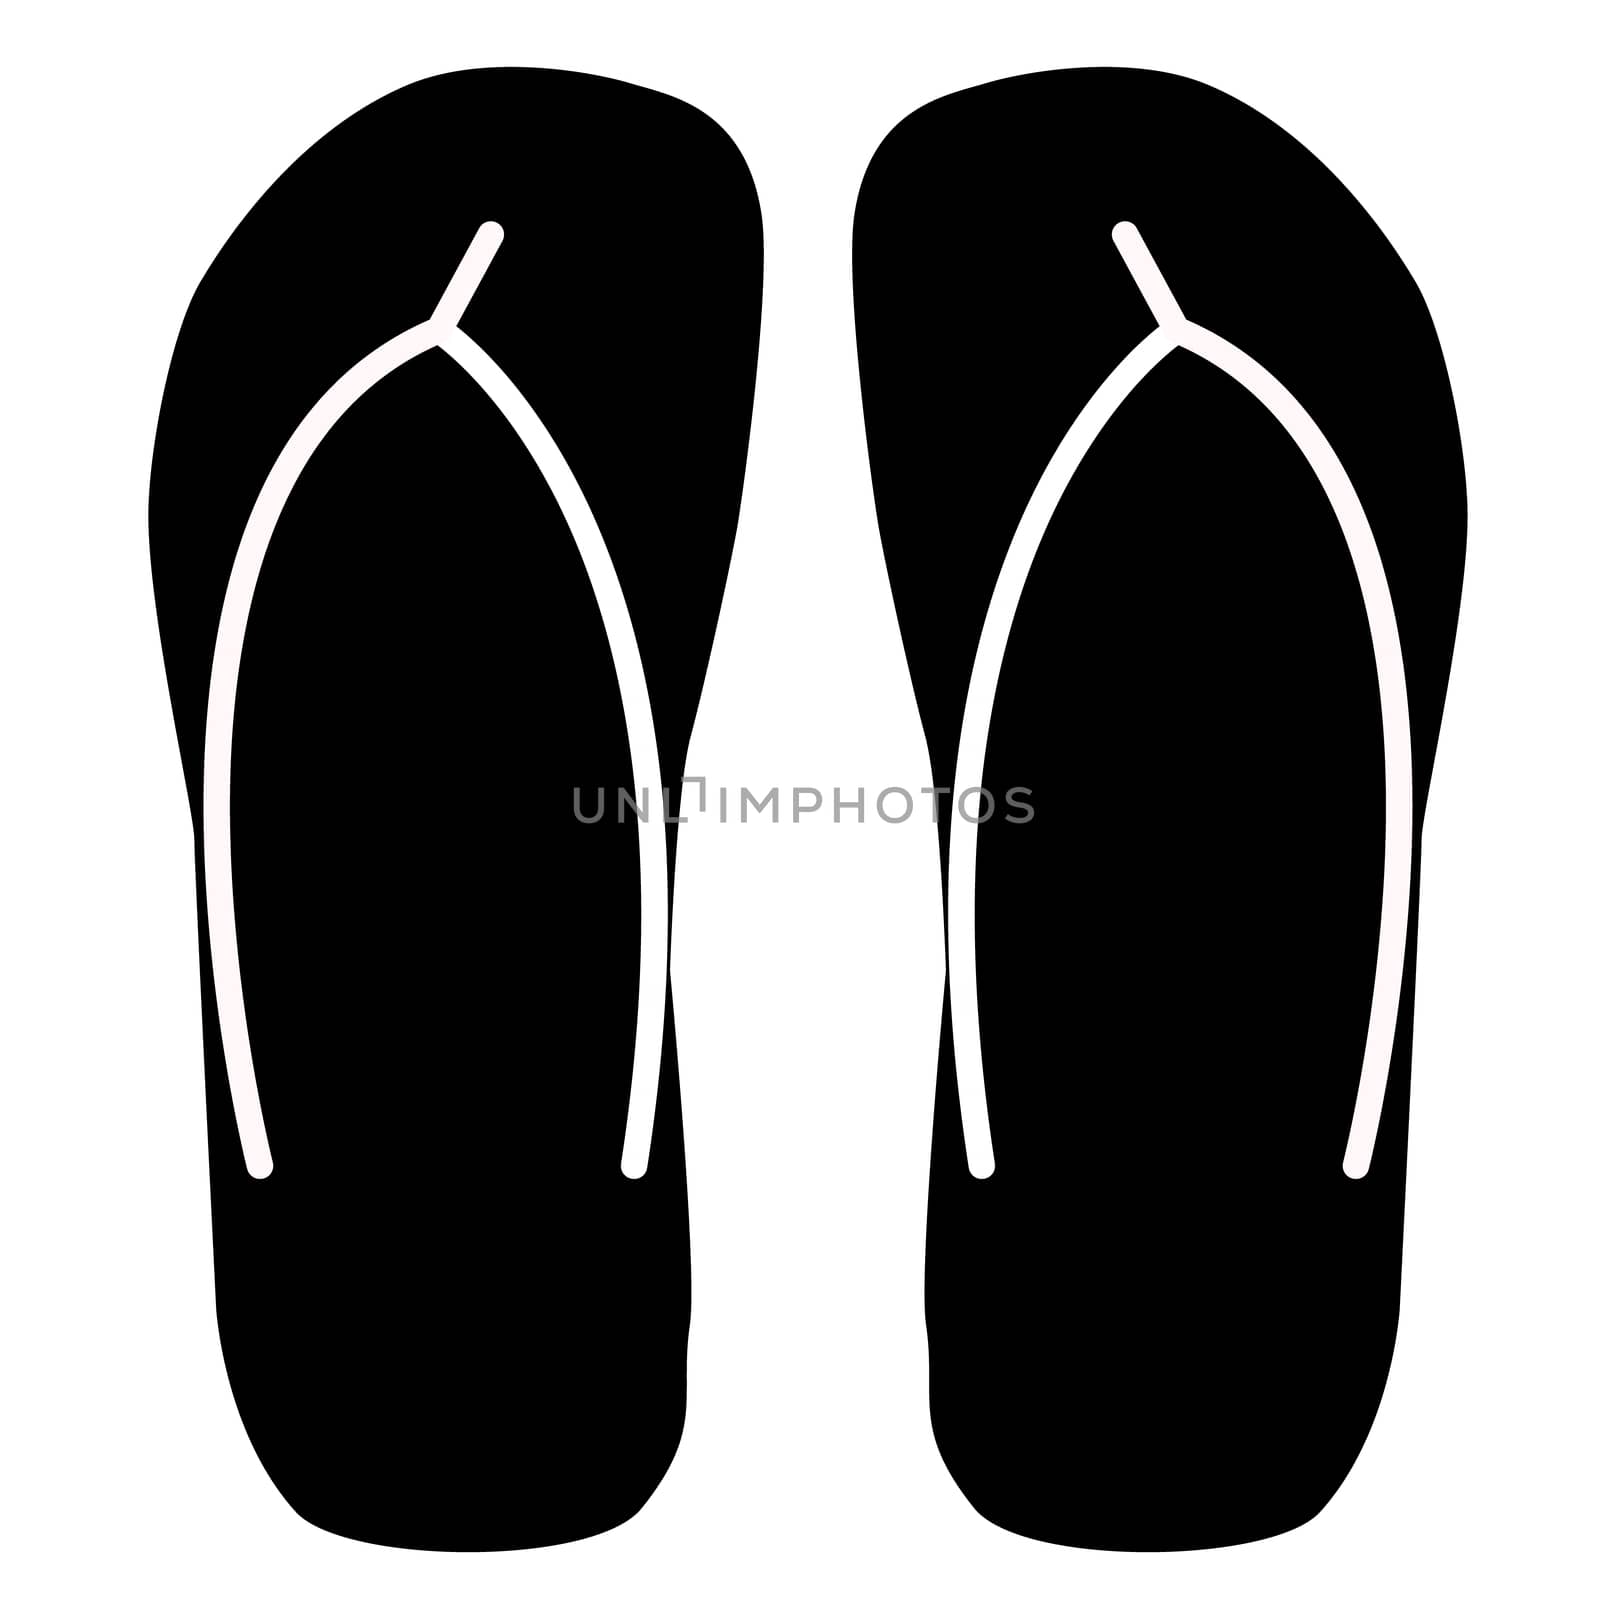 beach slippers icon on white background. beach slippers icon sign. flat design style. 